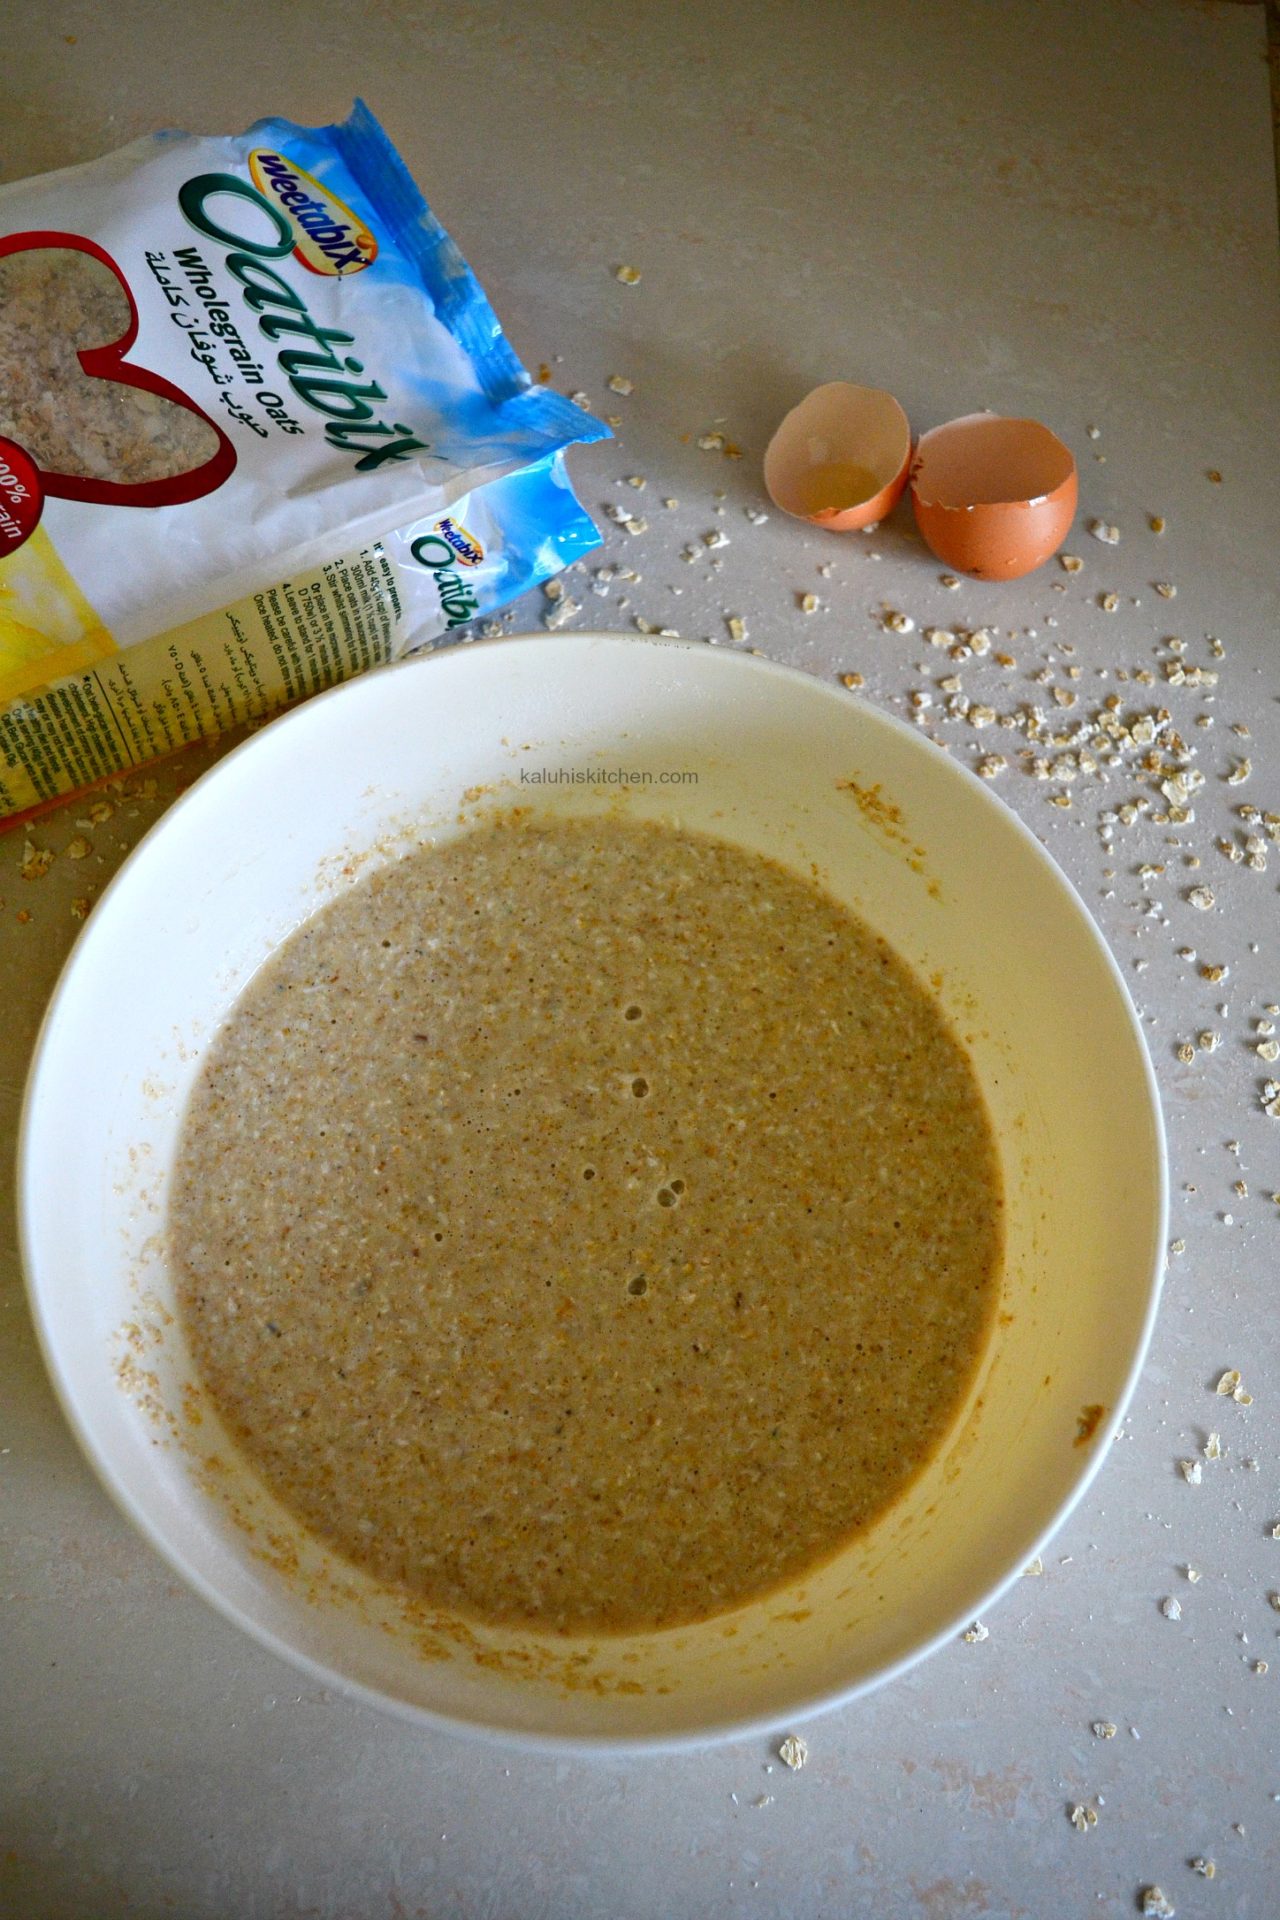 making oat oancakes is the same as using wheat flour only that we have more fibre with theis option_kaluhiskitchen.com